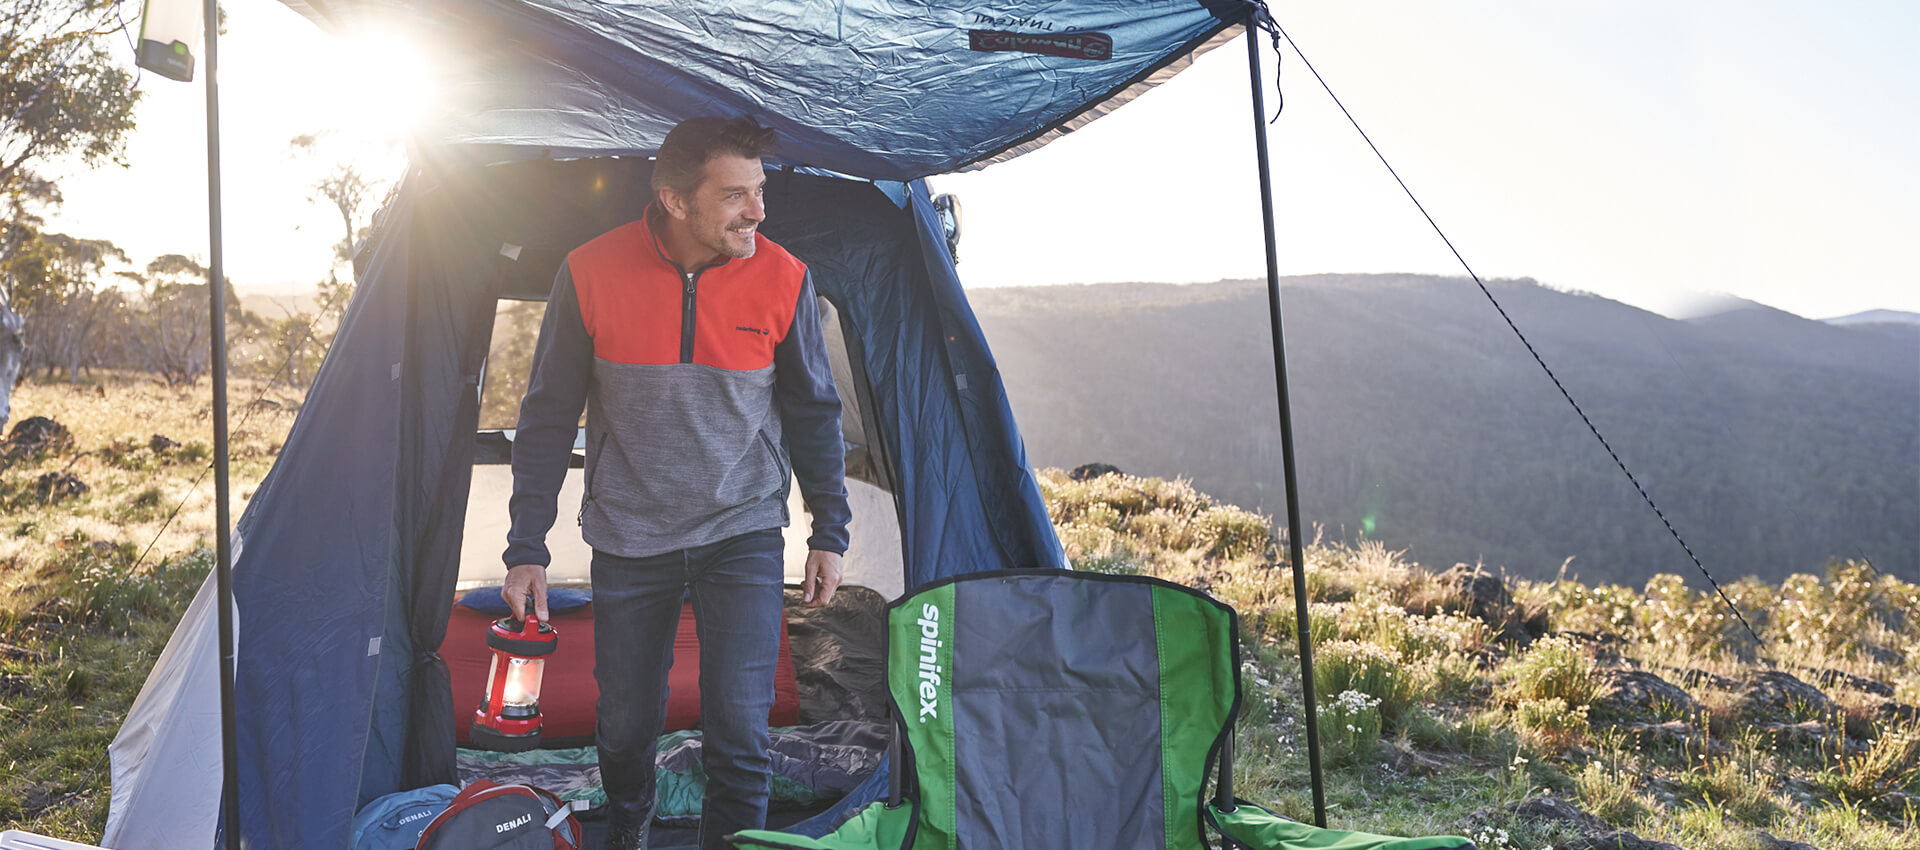 Wear The Right Clothing For Winter Camping